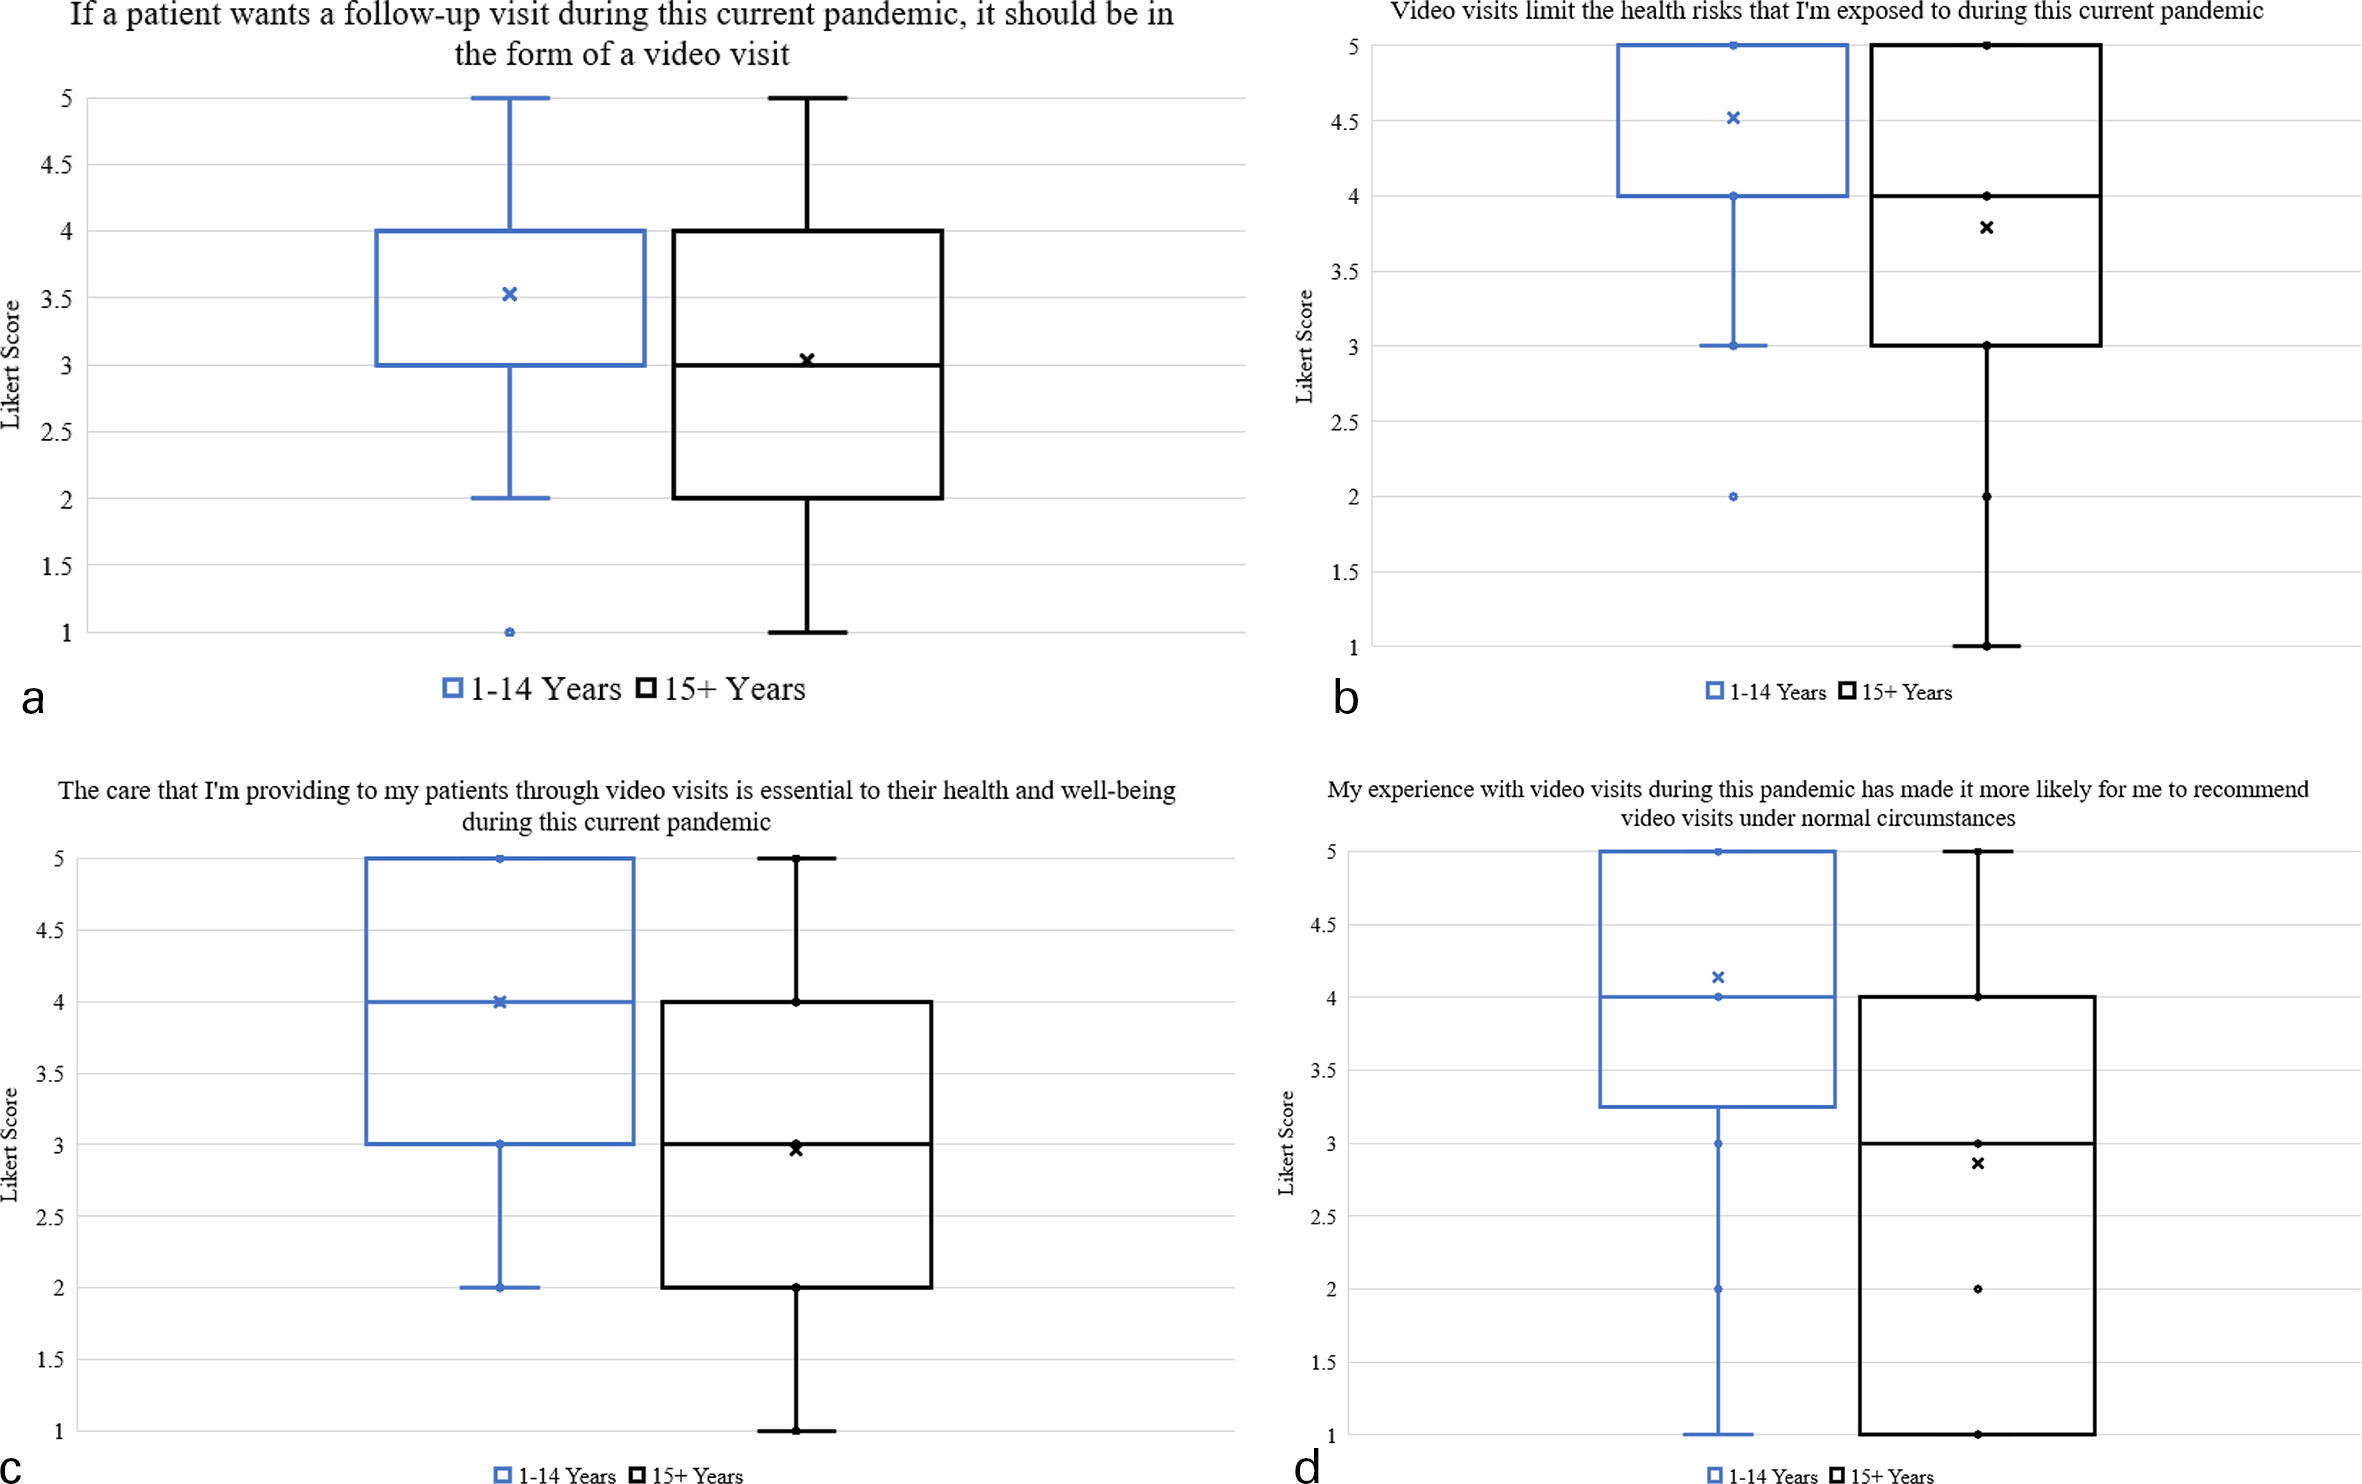 Fig. 1 
          Orthopaedic provider perceptions of virtual care during the COVID-19 pandemic based on years of experience: Likert scores are scaled from 1 to 5, with 1 representing “Strongly Disagree” and 5 representing “Strongly Agree”. Survey responses are represented using box plots, with means being represented by circle and plus-sign characters. Statistical significance (p < 0.05) is indicated by asterisks.
        